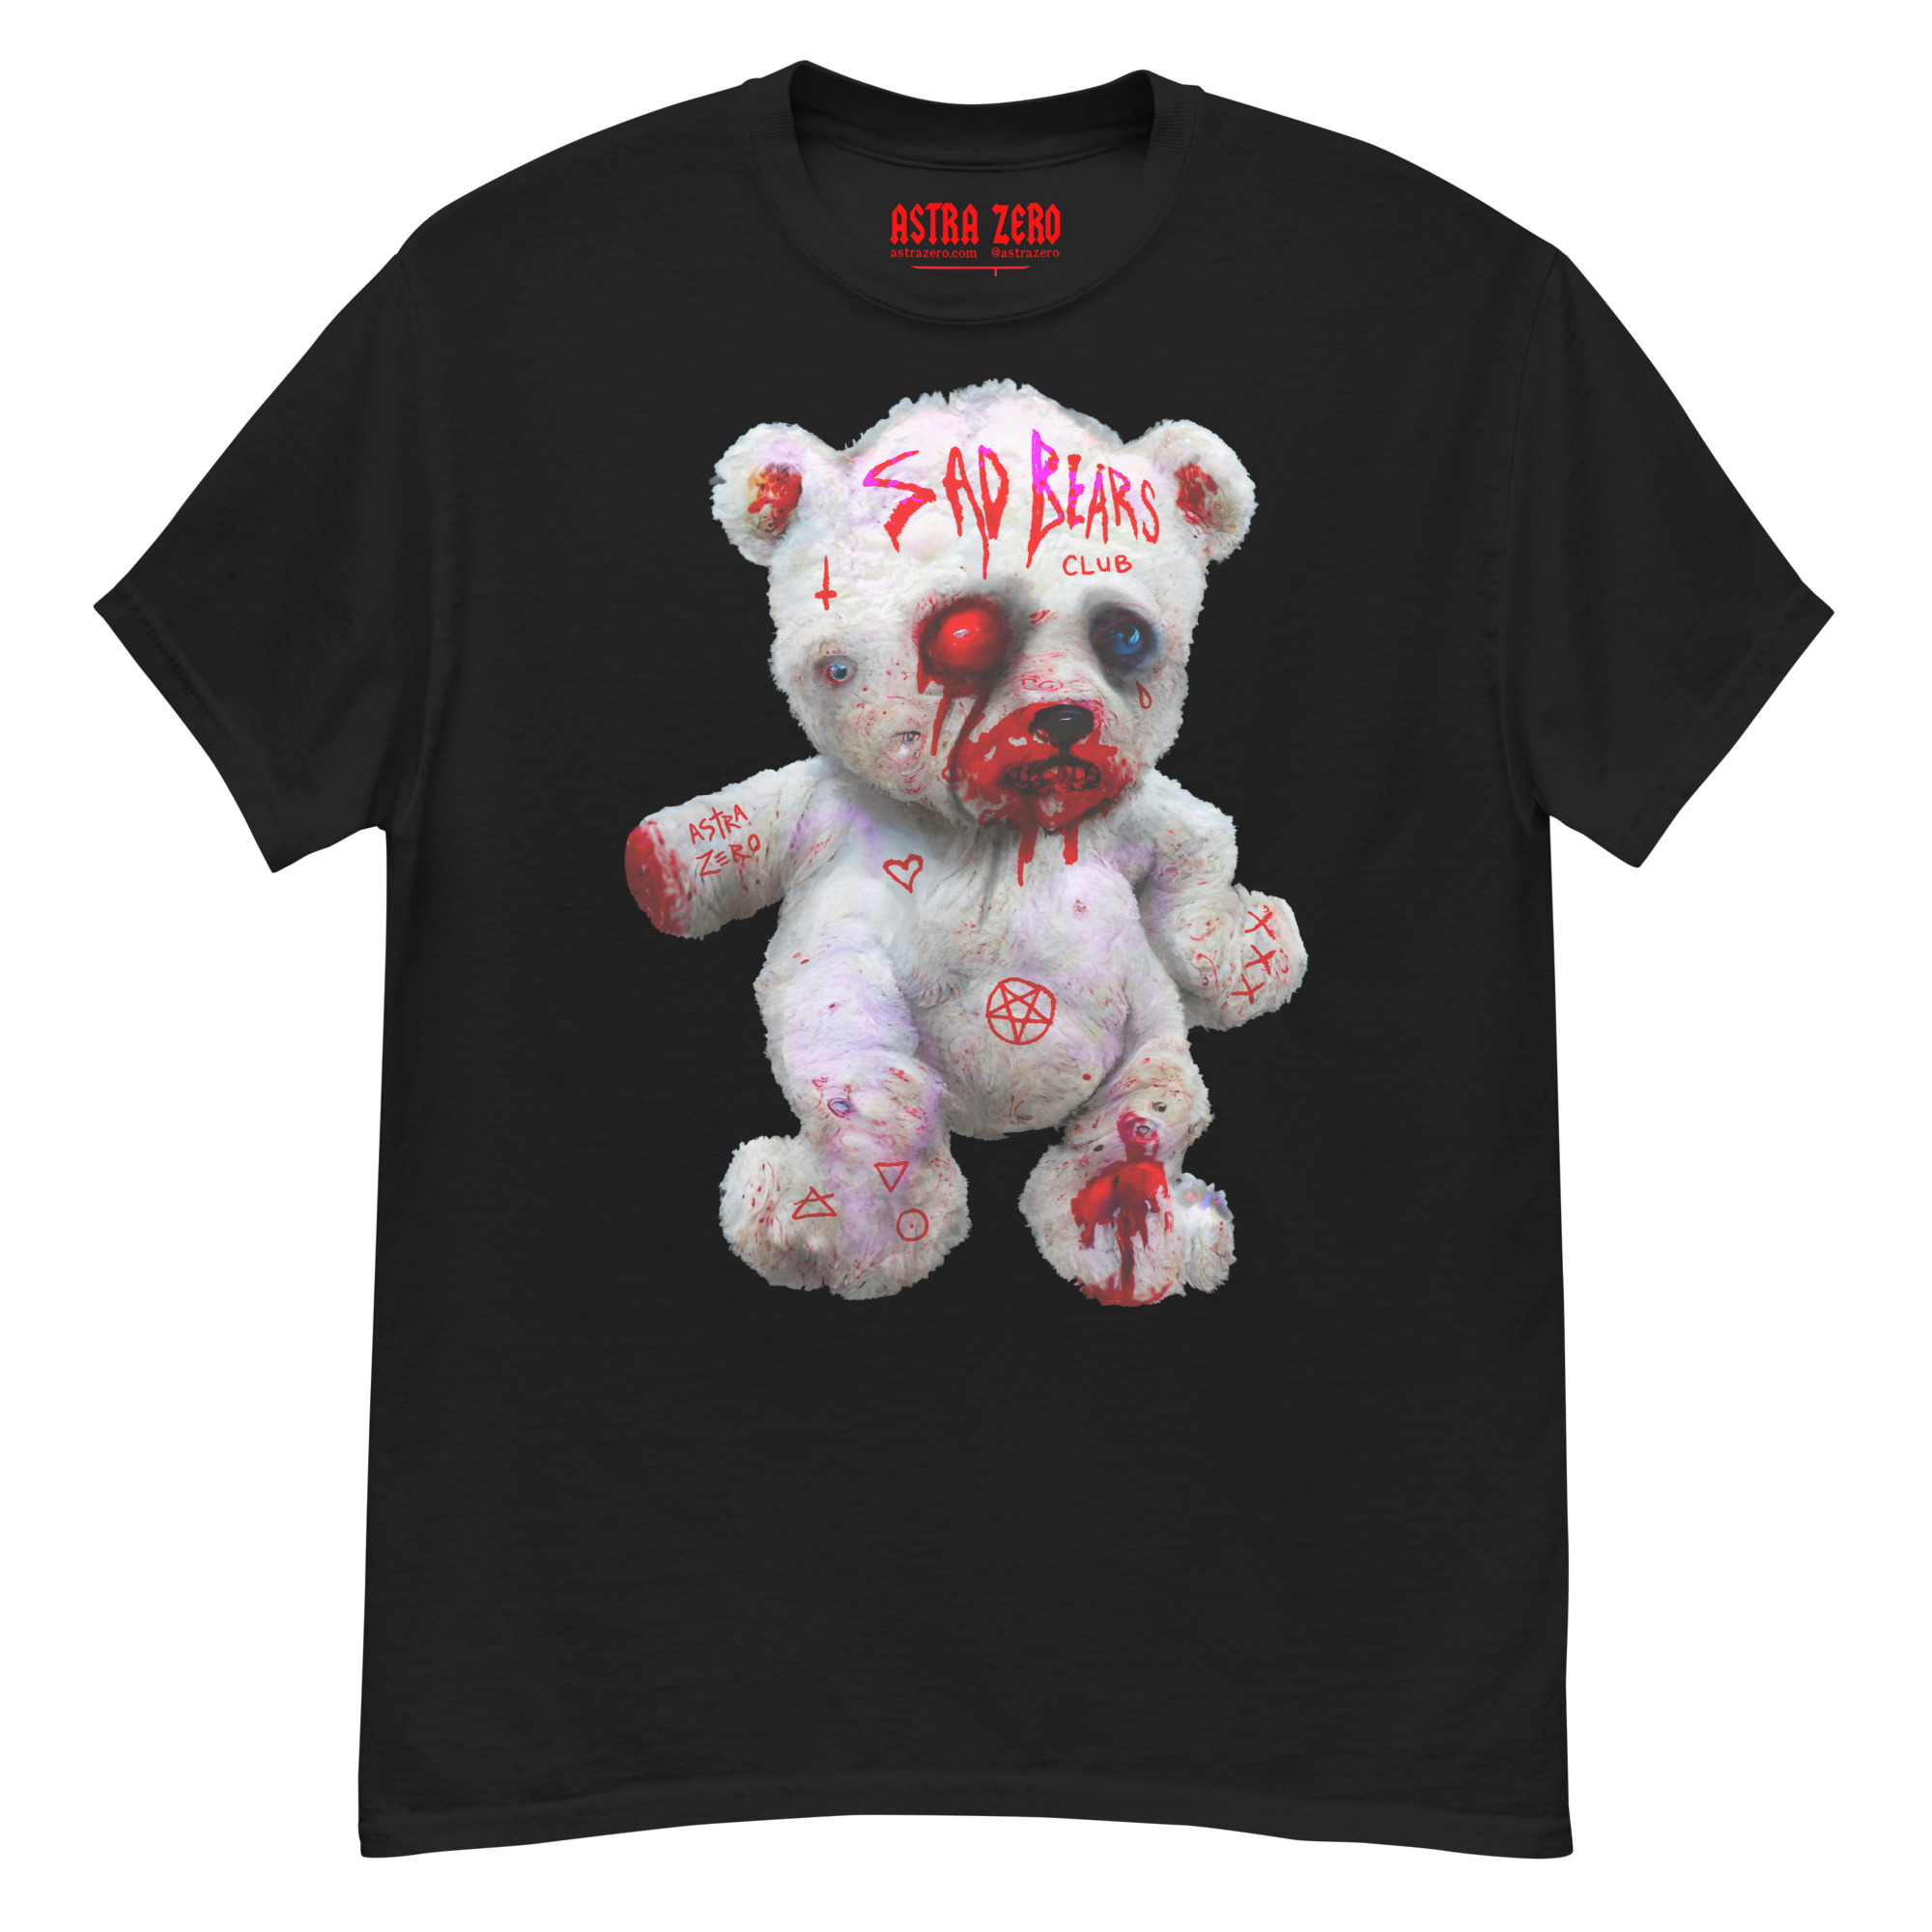 Featured image for “Sad Bears Club - Men's classic tee”